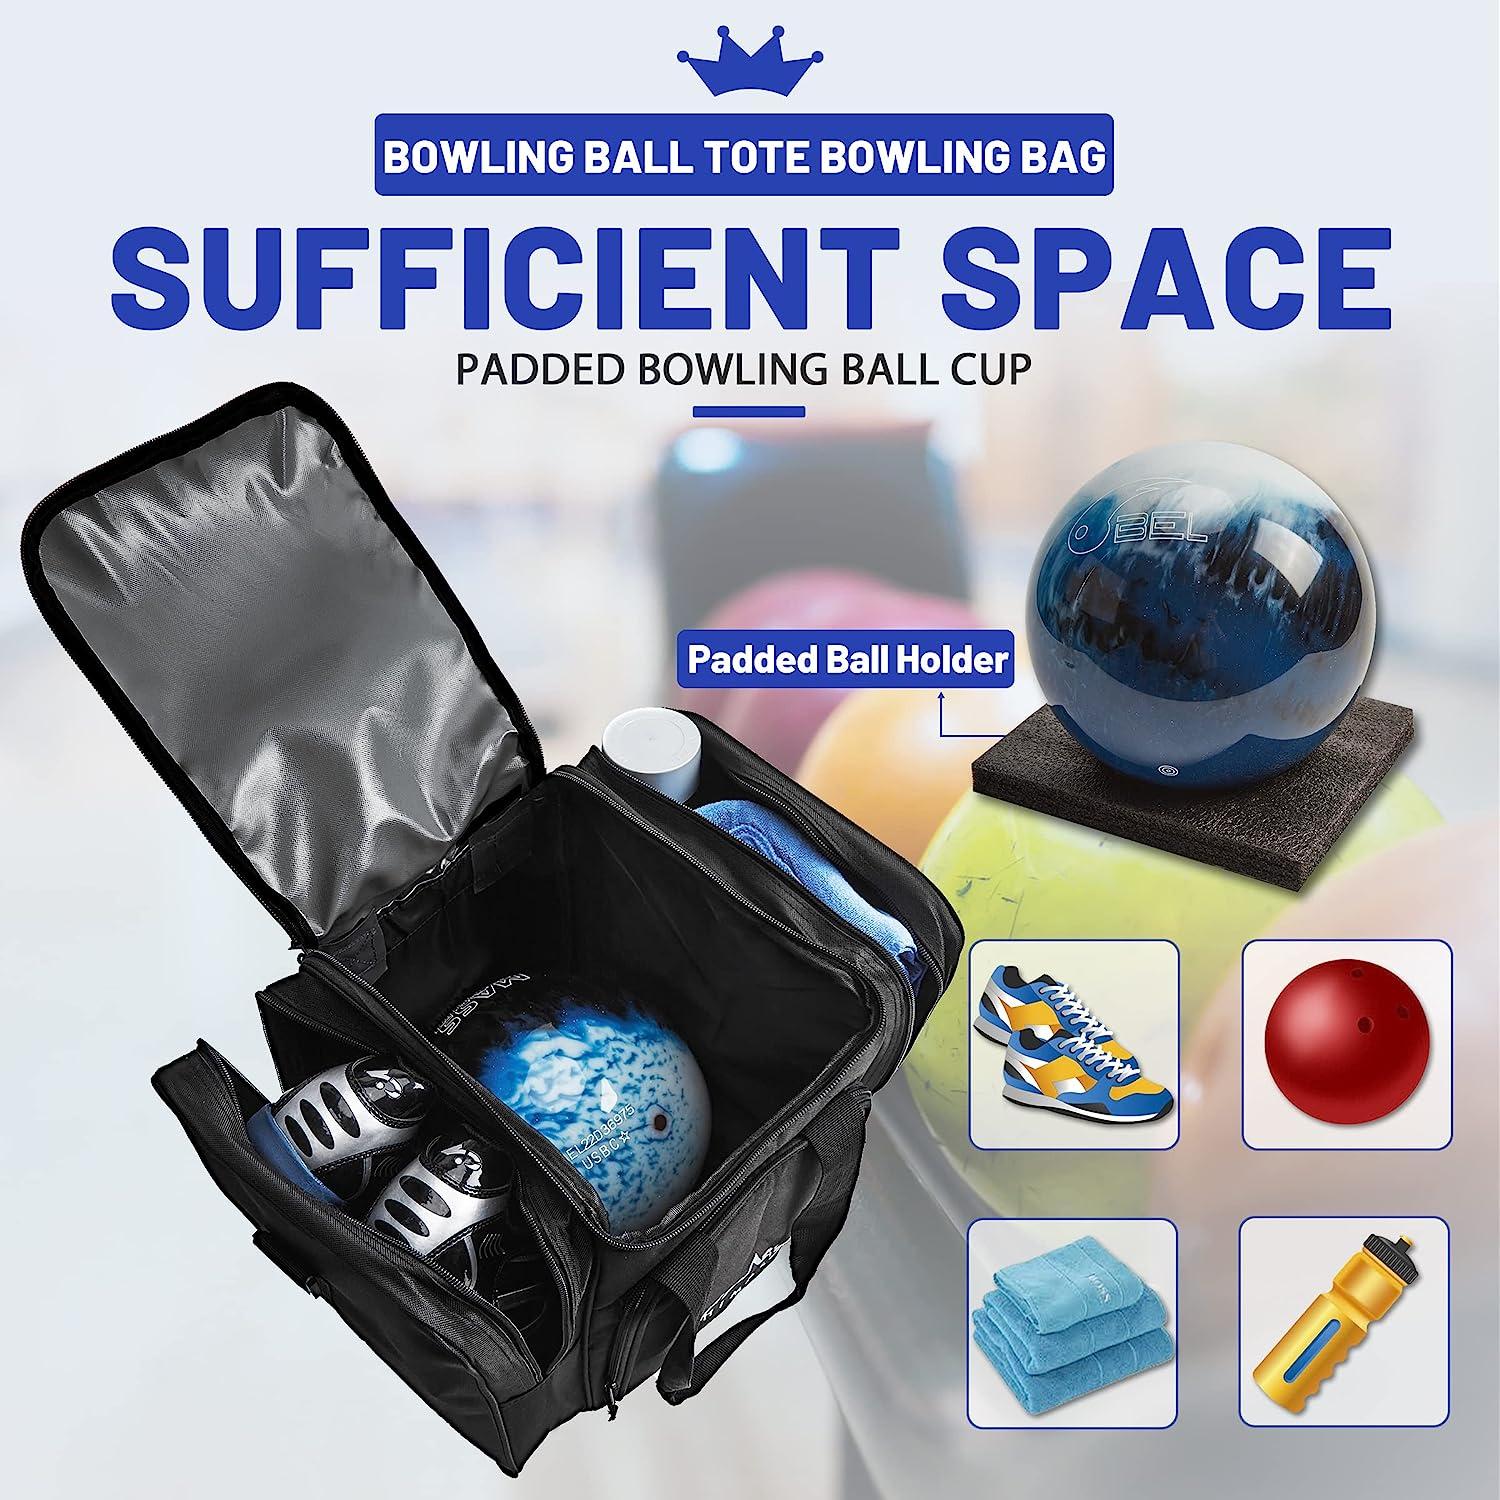 A Set Of Bowling Product Bowling Ball/shoes/bags/gadgets For